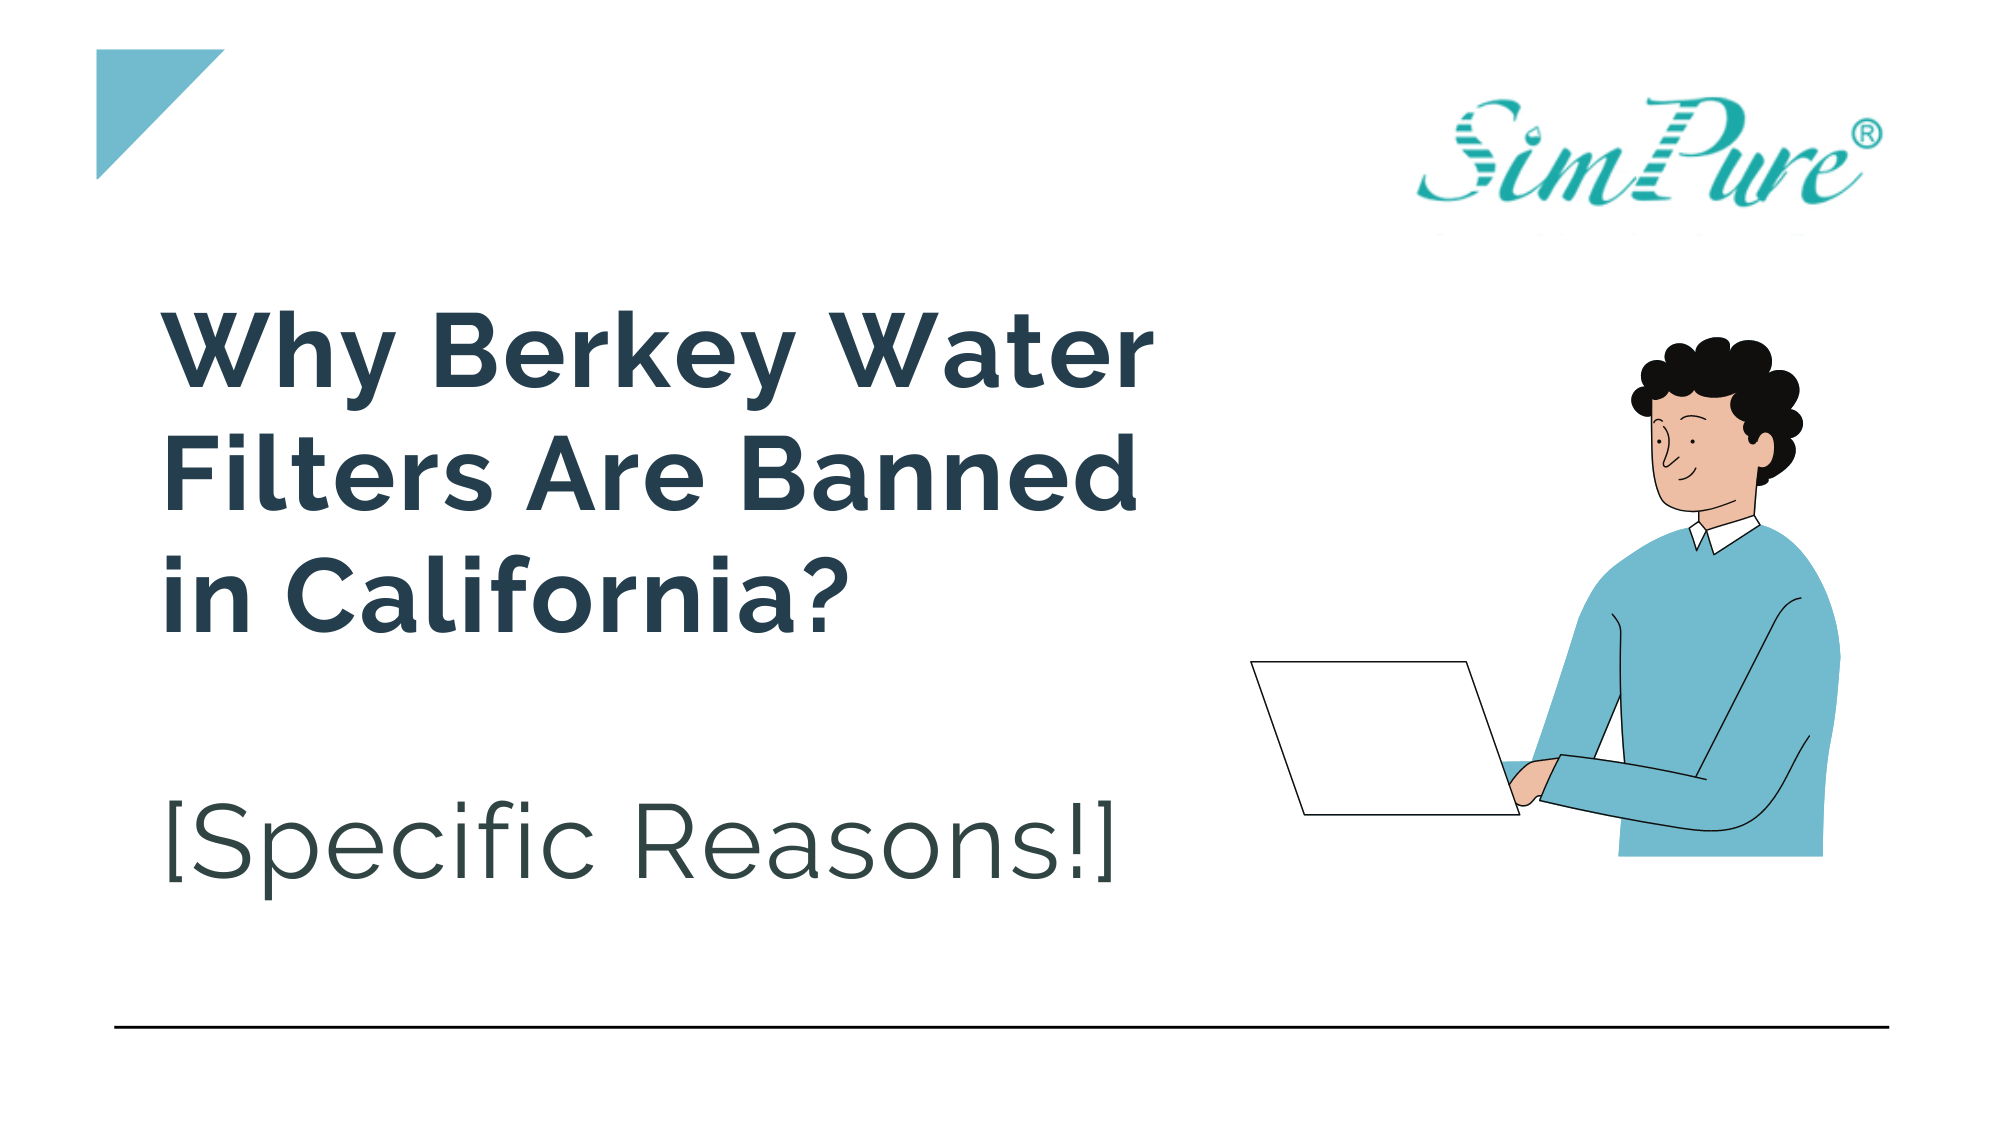 why are berkey water filters banned in california